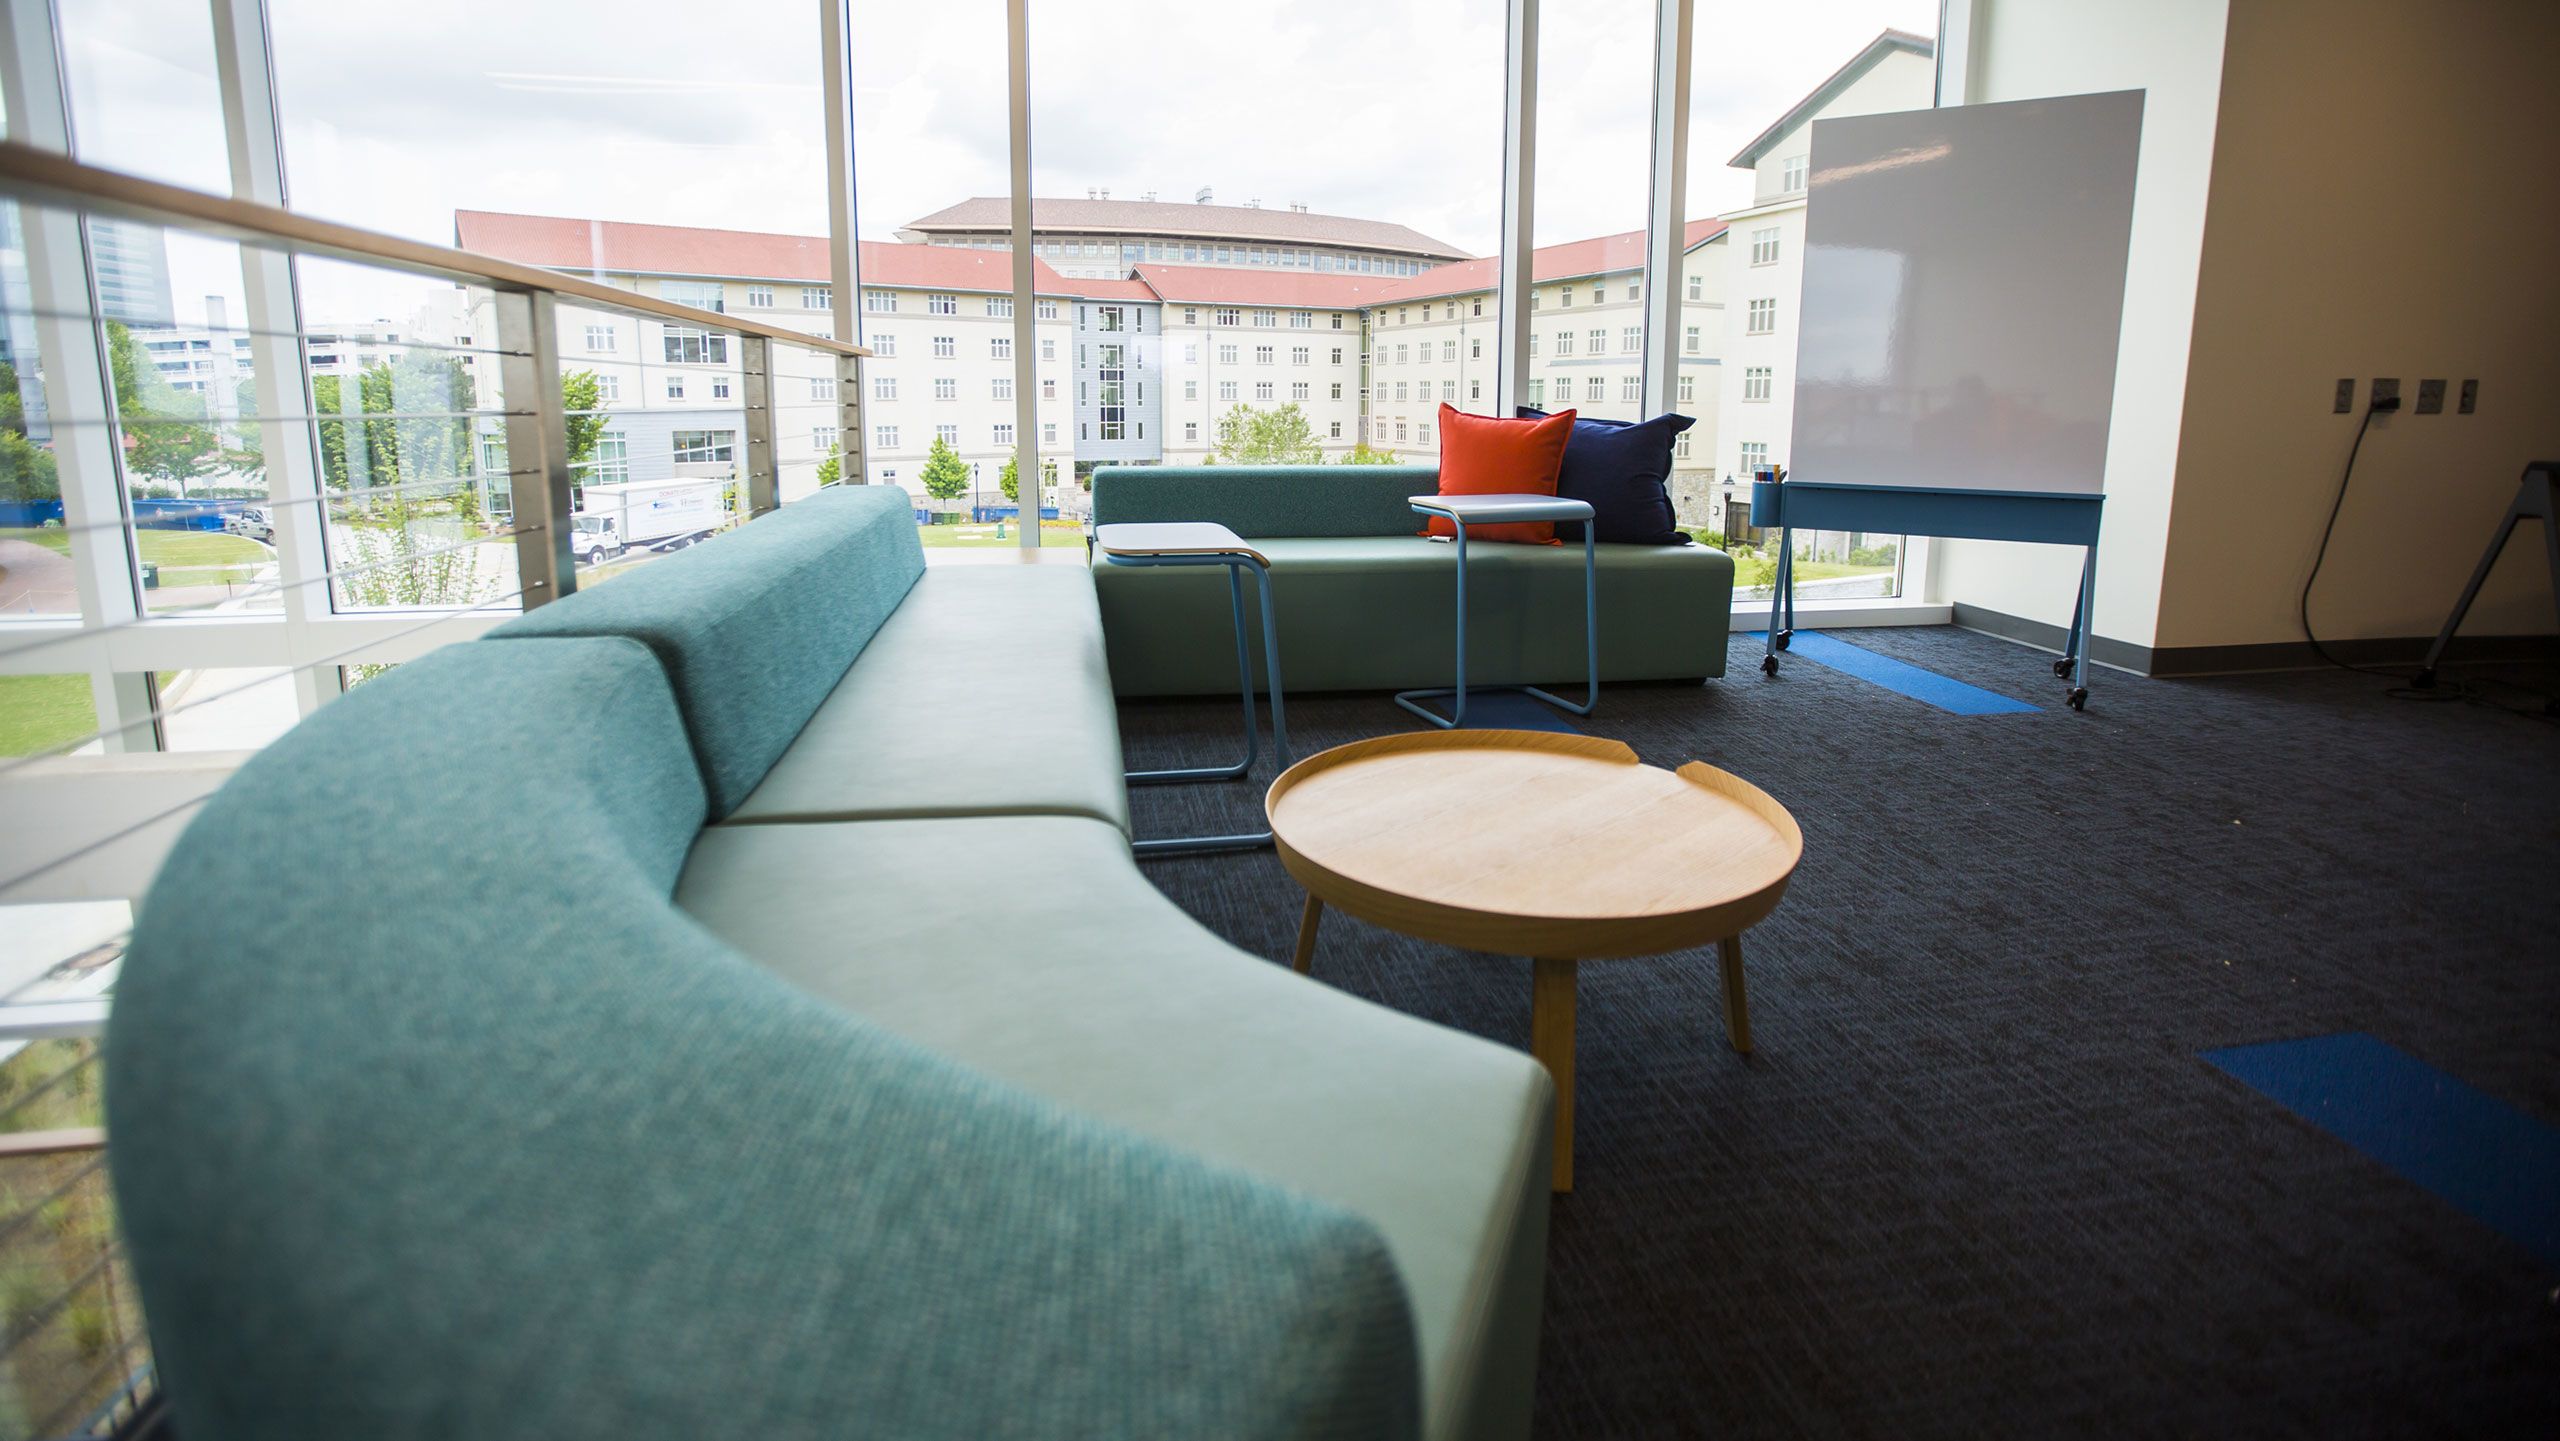 Dobbs Common Table is designed to give Emory University students a